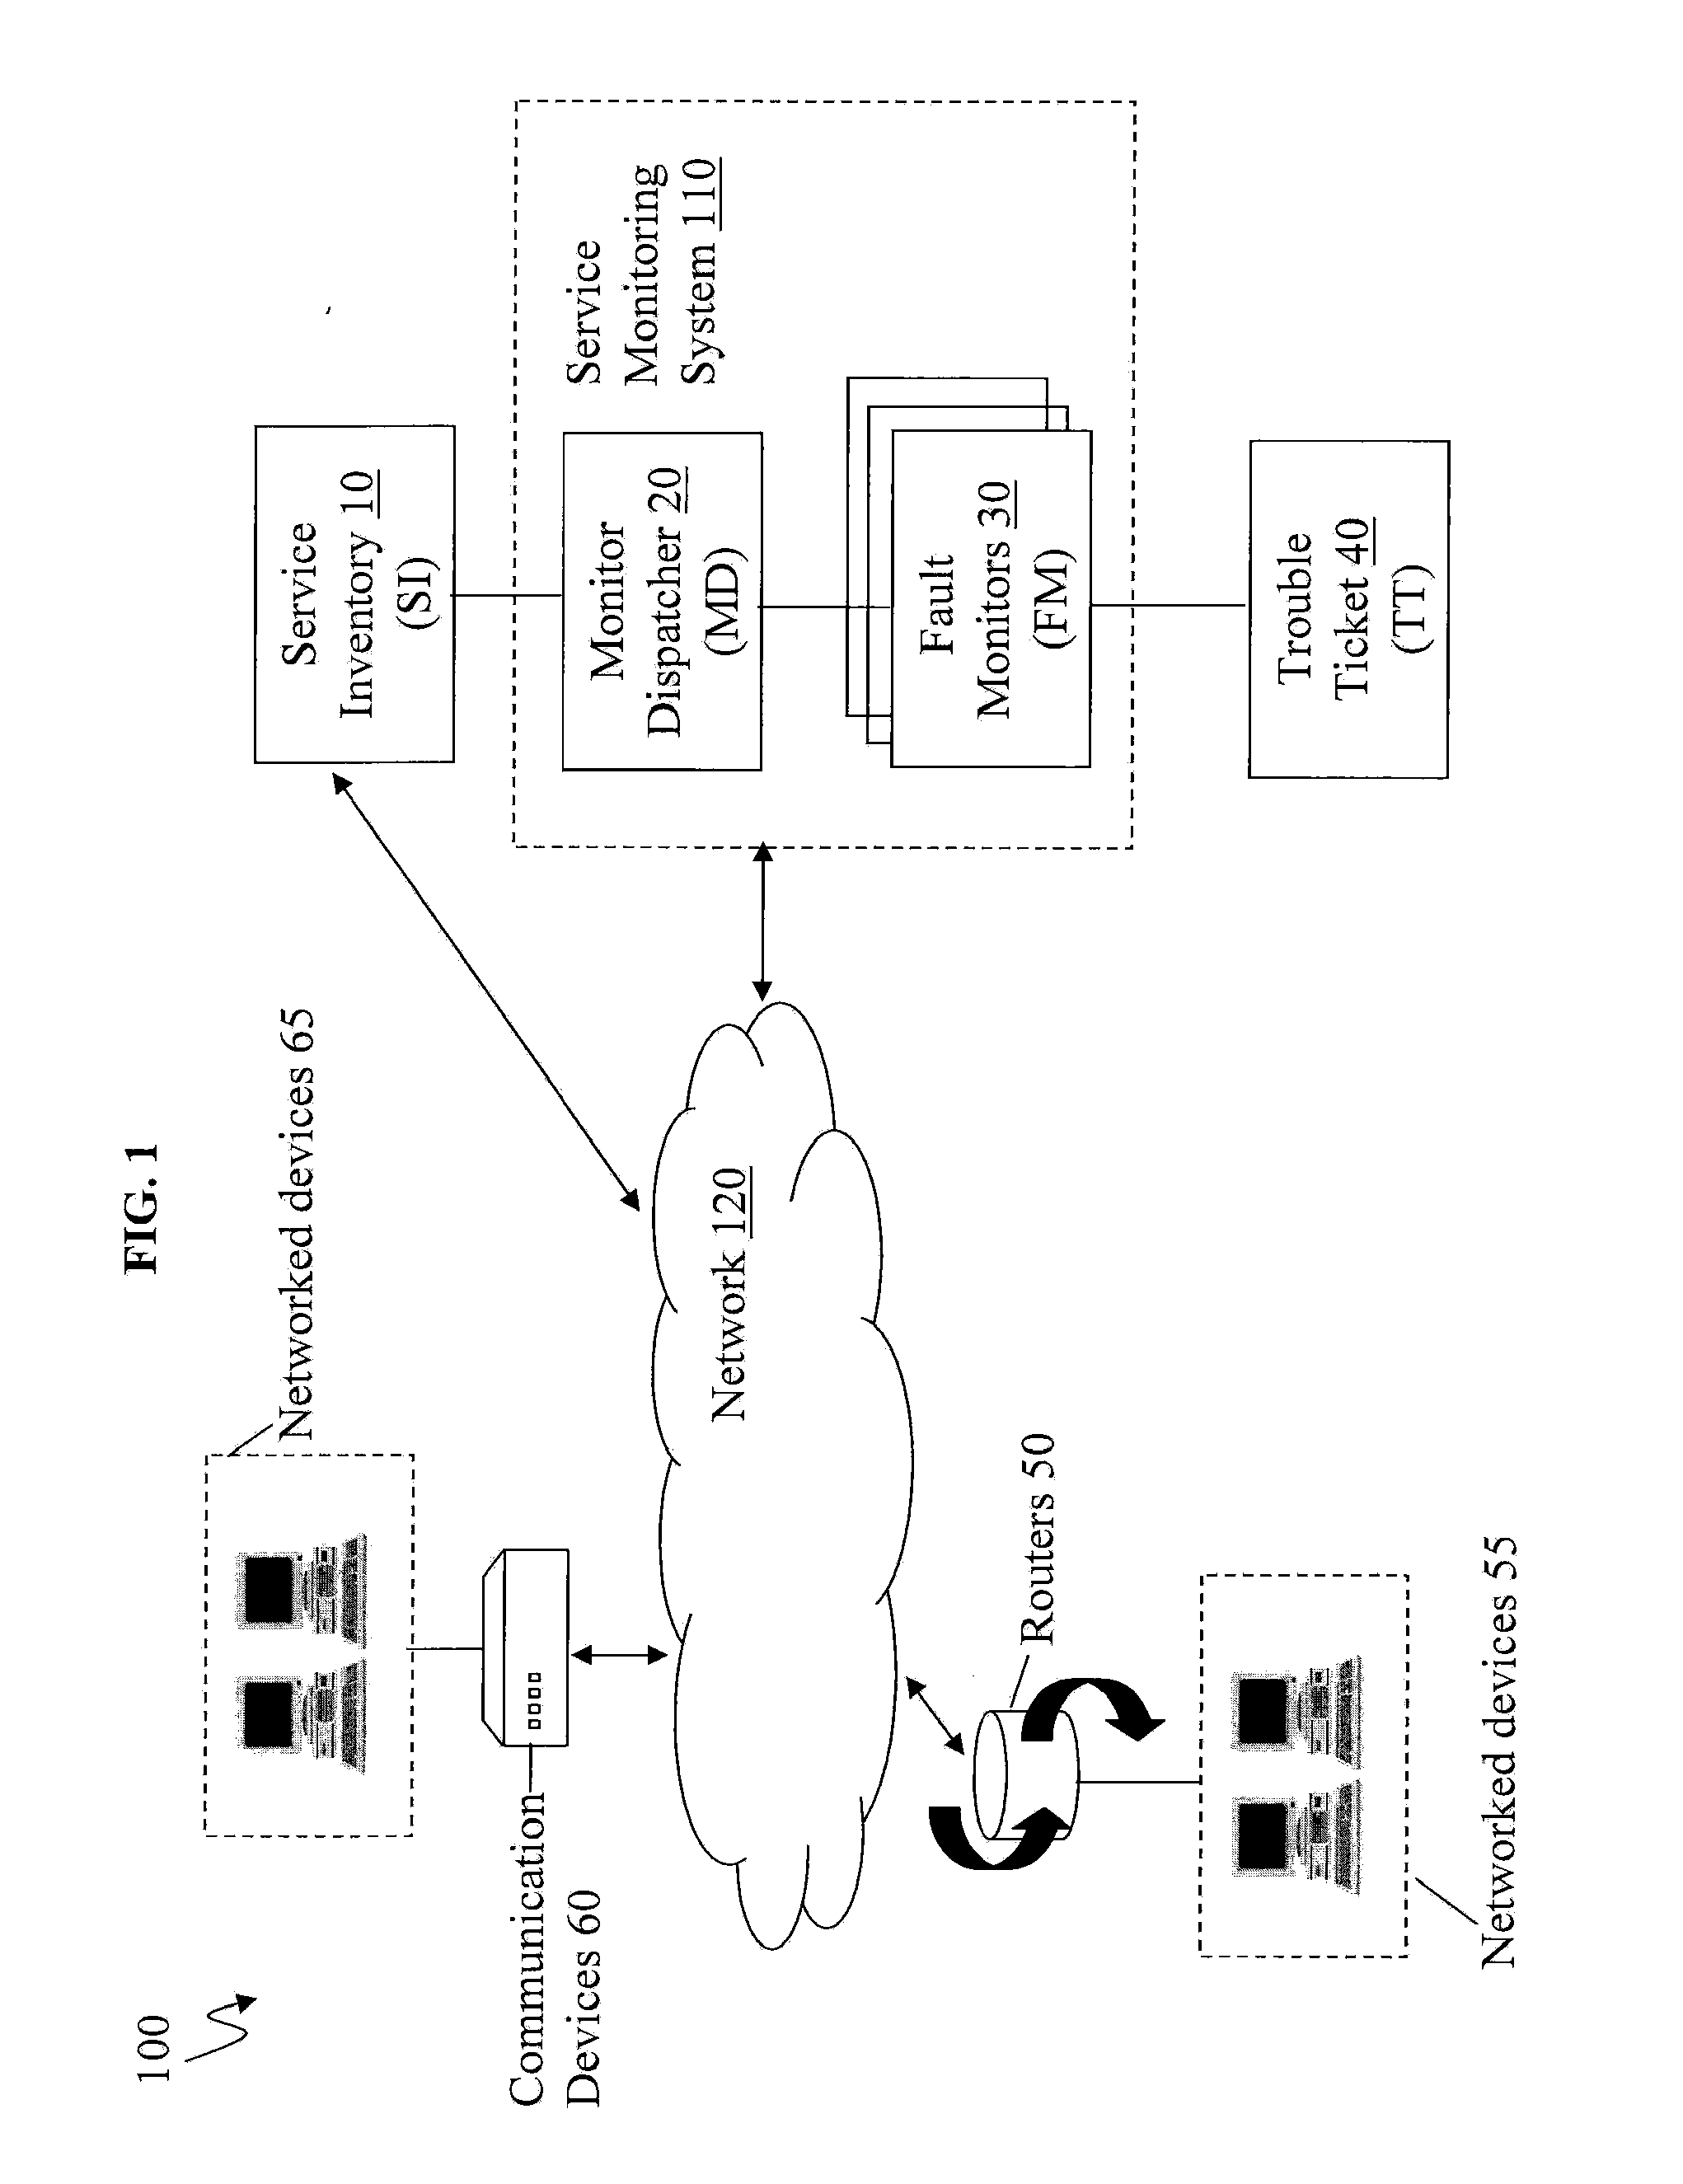 Scalable and Robust Mechanism for Remote IP Device Monitoring With Changing IP Address Assignment